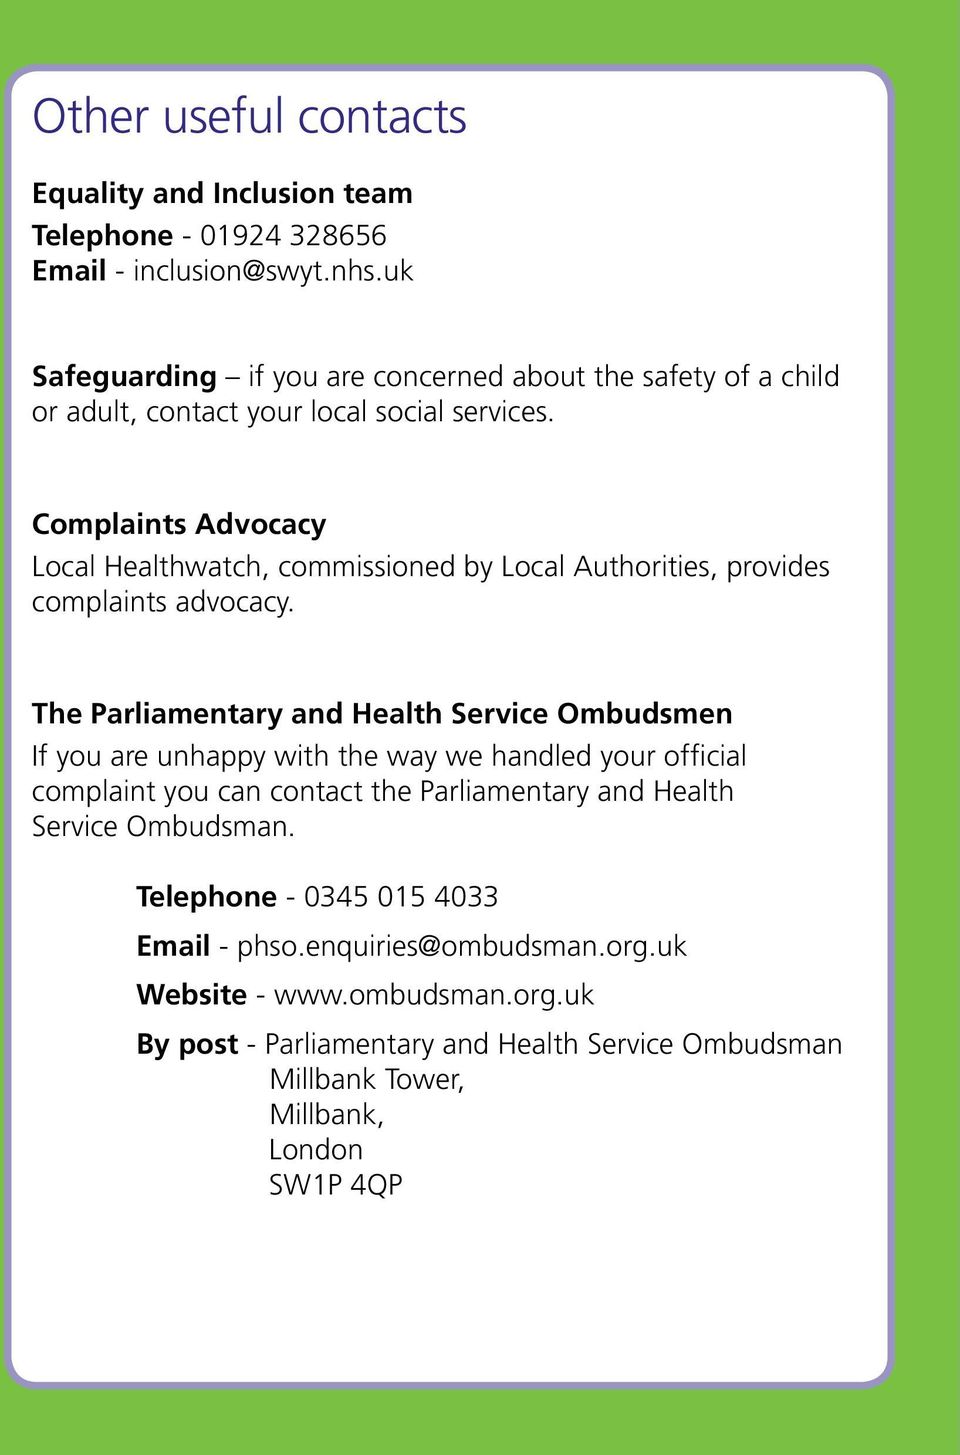 Complaints Advocacy Local Healthwatch, commissioned by Local Authorities, provides complaints advocacy.